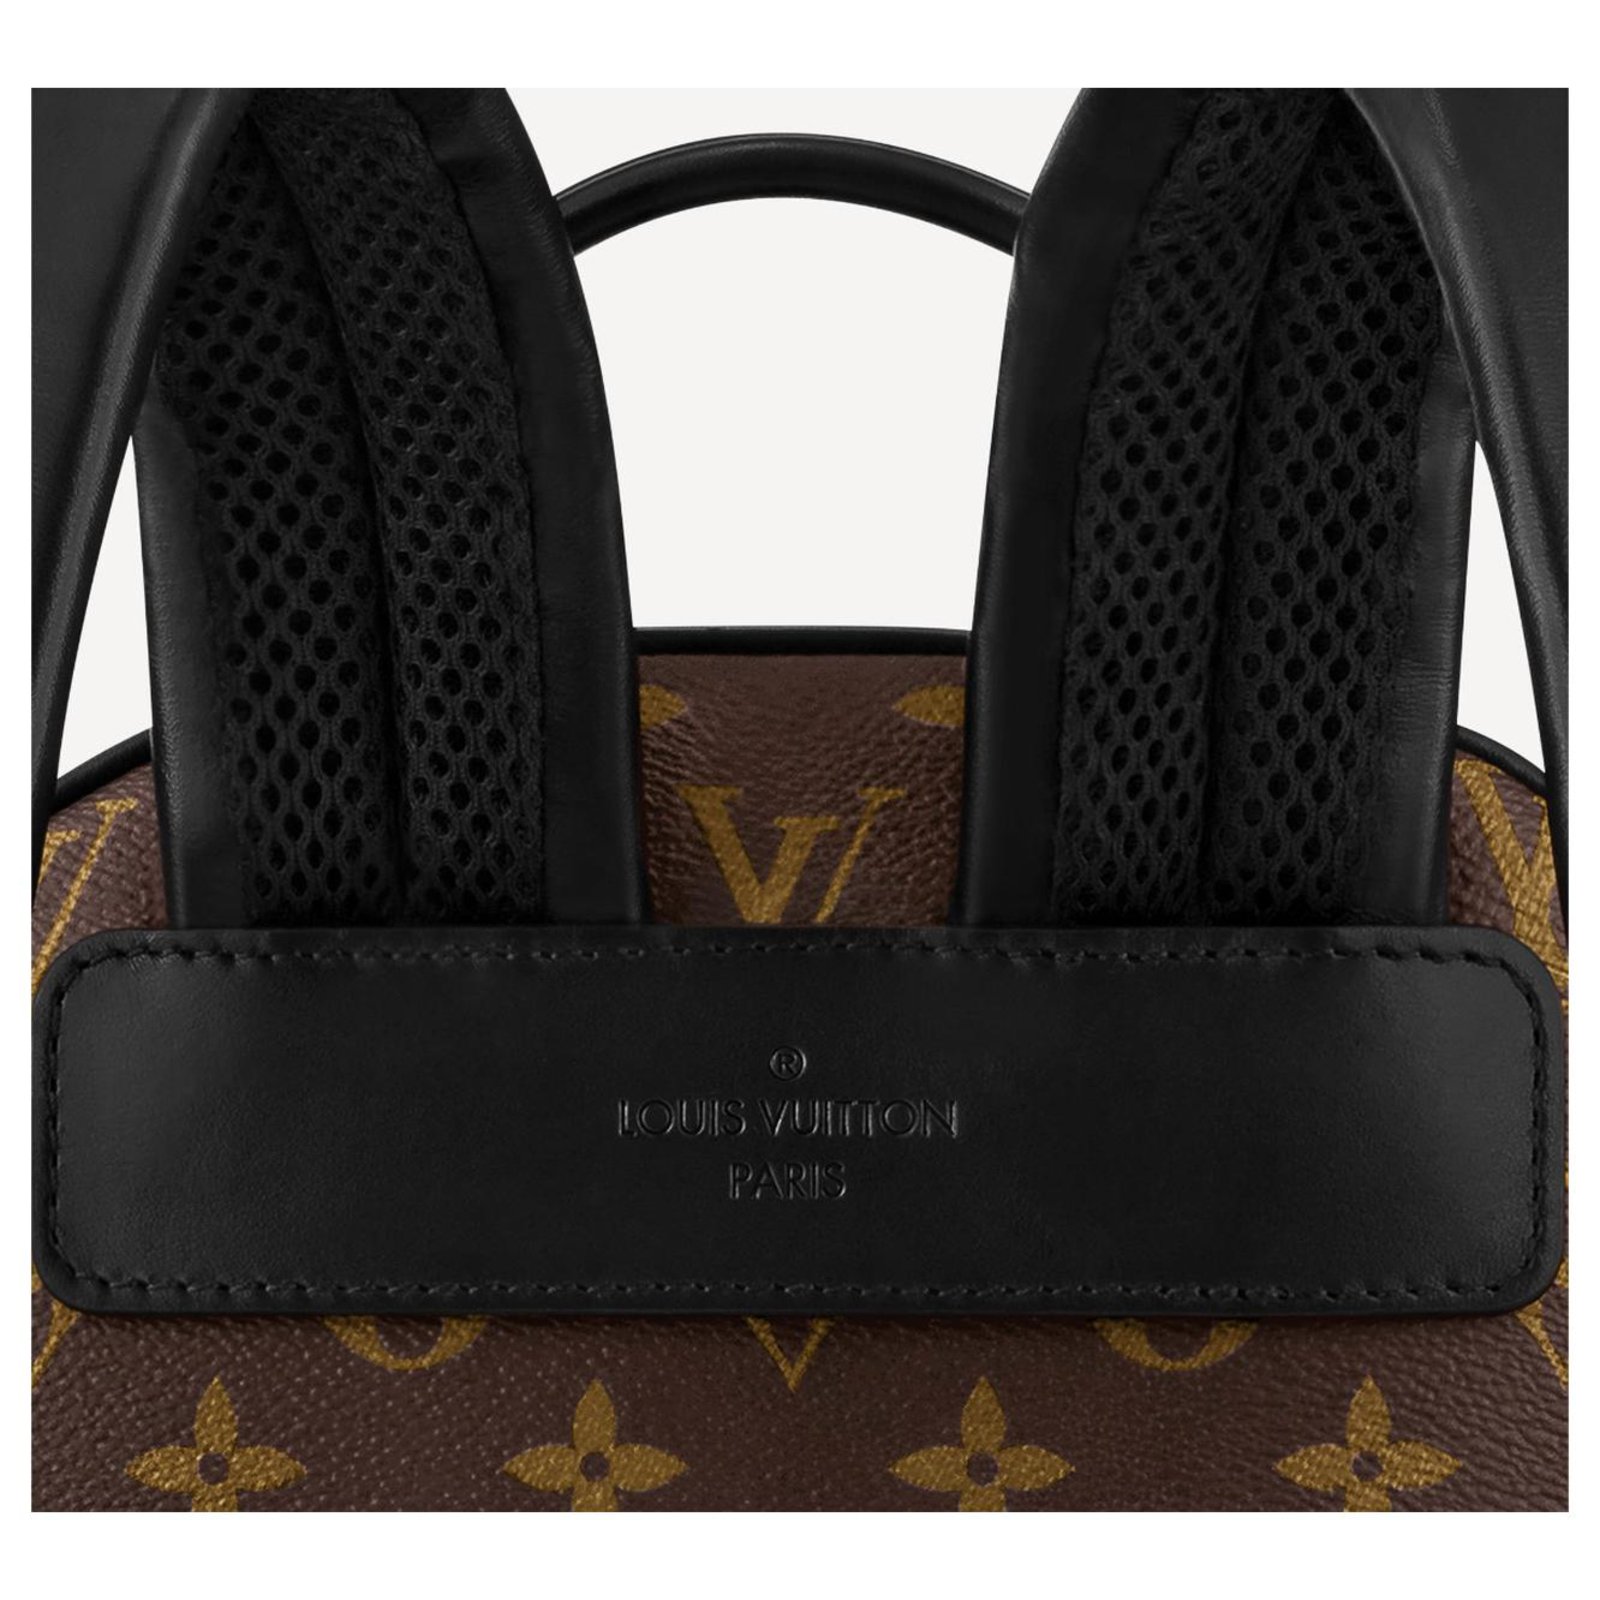 Josh backpack leather bag Louis Vuitton Brown in Leather - 34325231